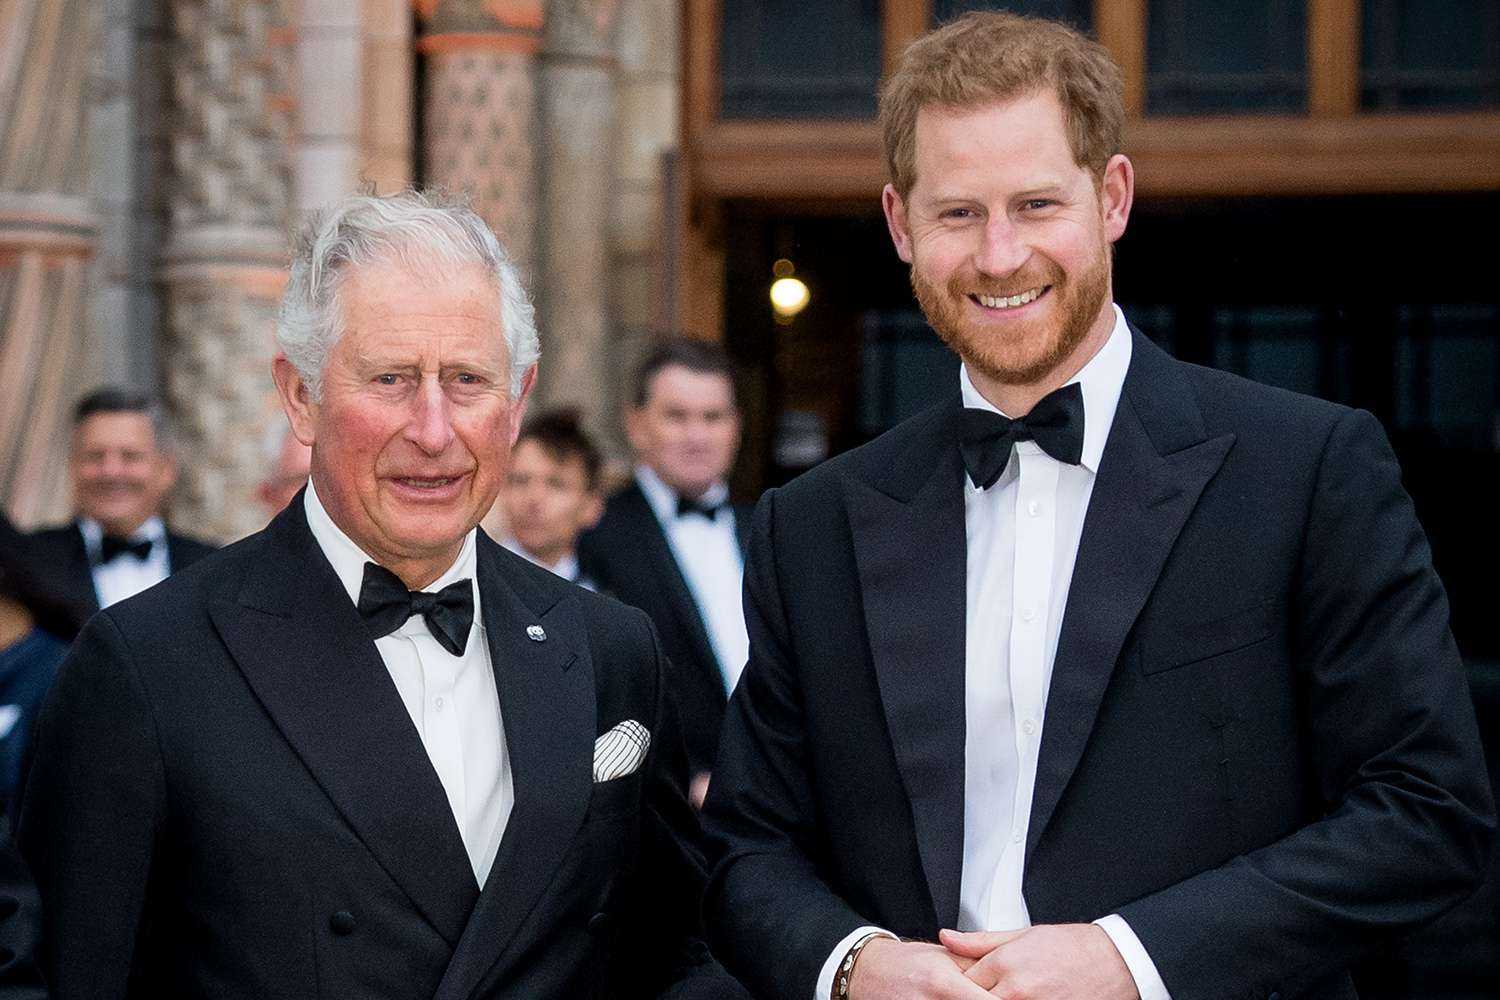 Prince Harry, son of the UK's King Charles, is visiting his father in the UK after he was diagnosed with cancer.